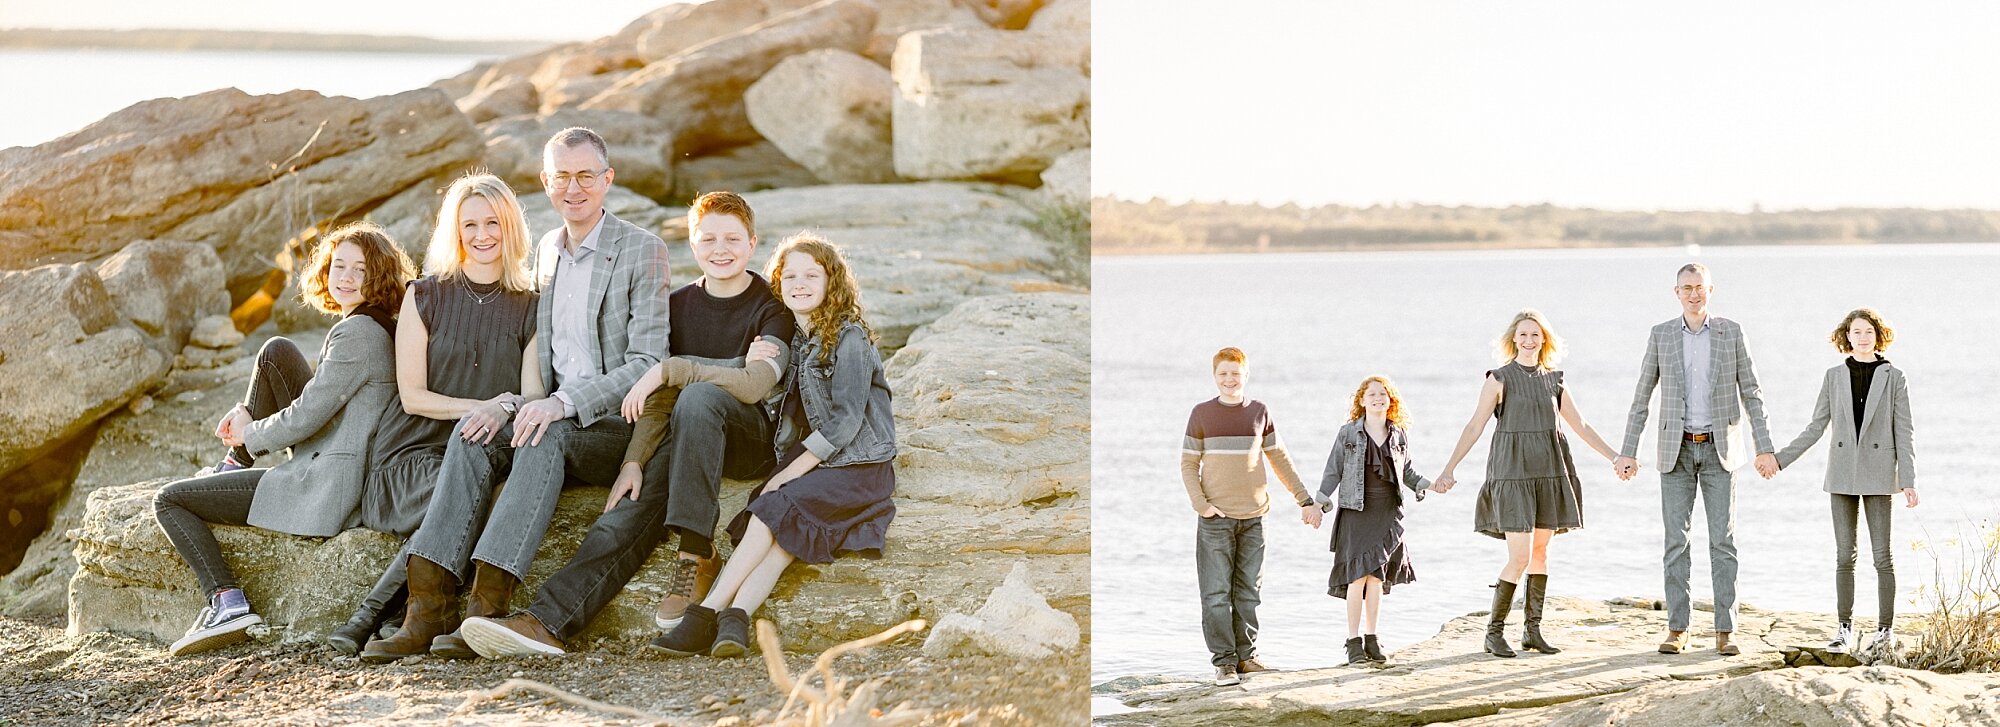 Dallas-photographer-for-families